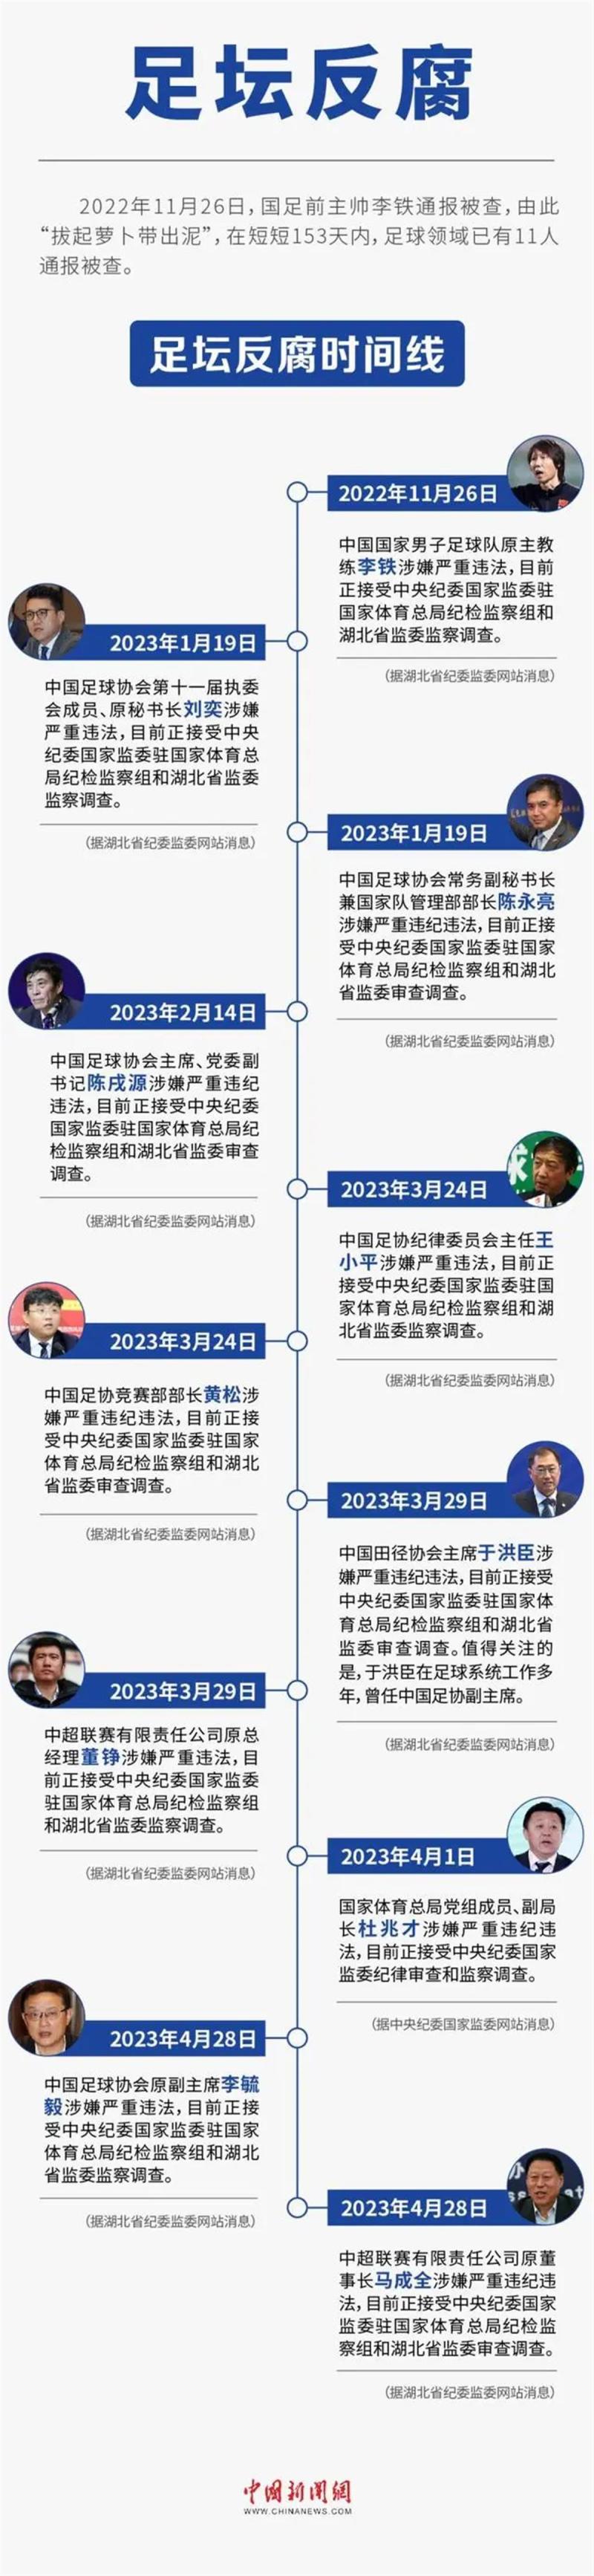 Five times a day, two "tigers" were played, and there were five "weekend tiger fights". The anti-corruption campaign in football has led to the appointment of two city secretaries | China Football Association | Football World